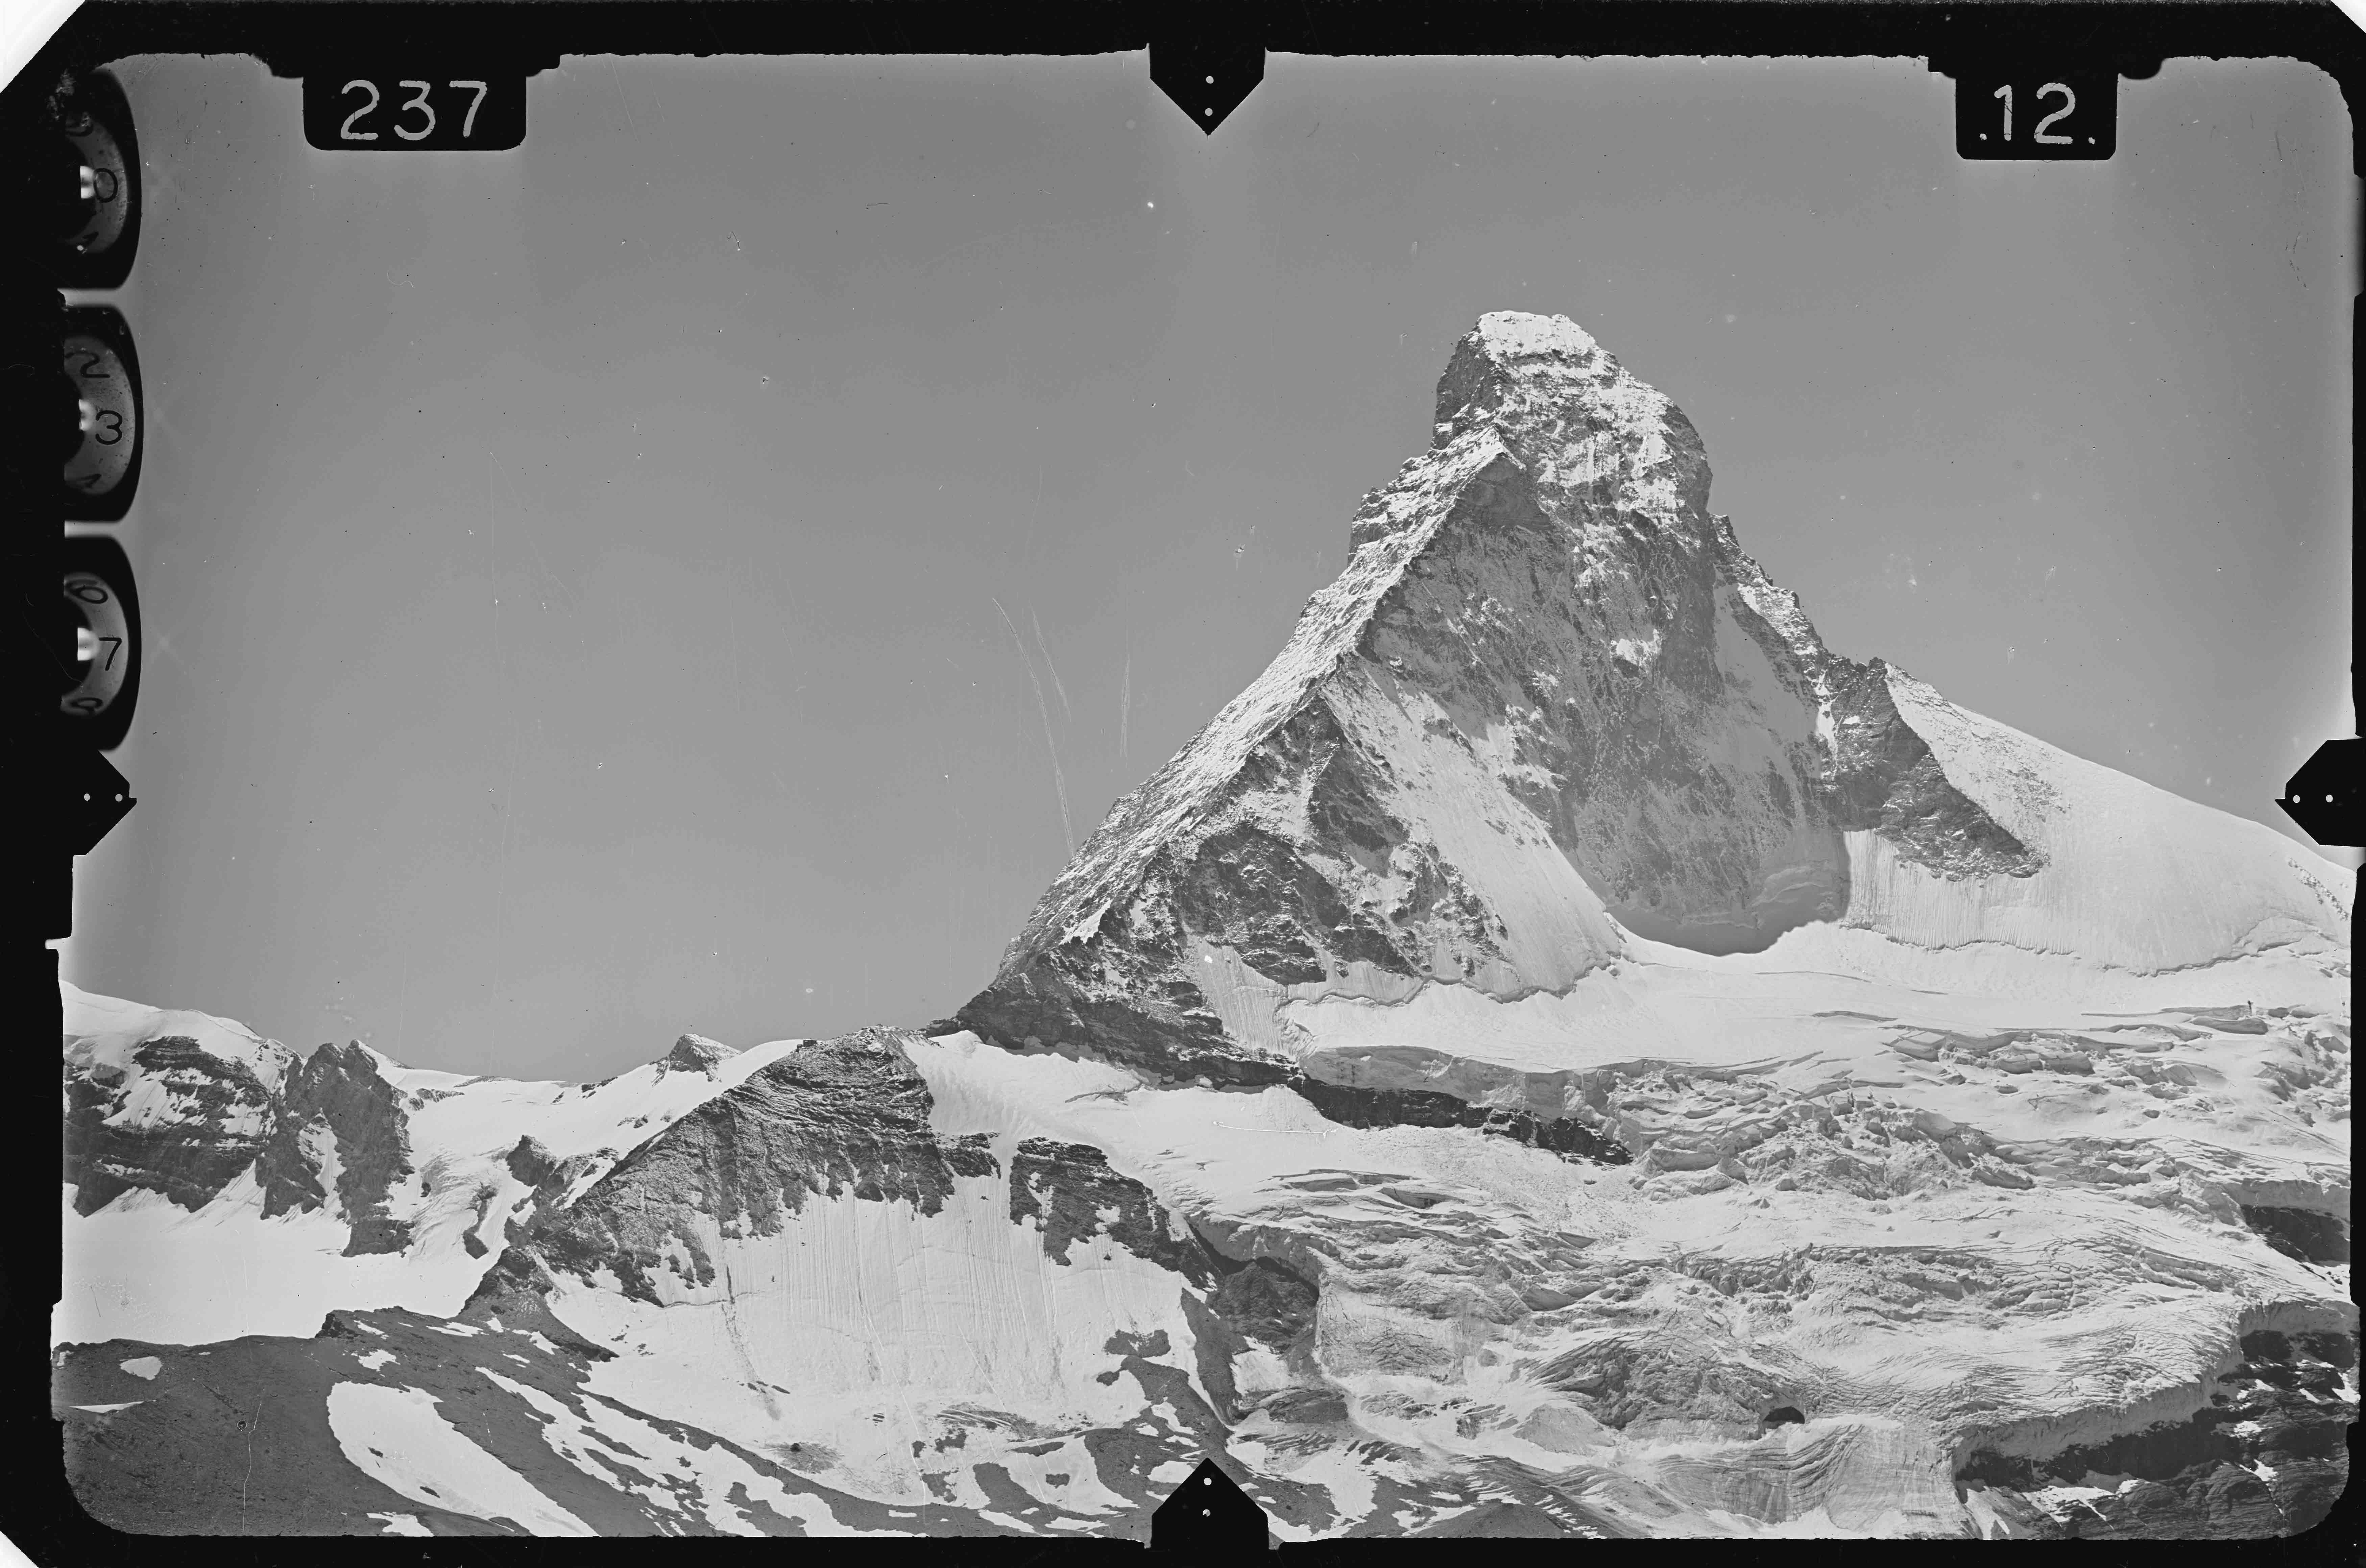 Measurement image of the snow-covered Matterhorn. The frame marks of the measurement image can be seen at the edge of the photograph.